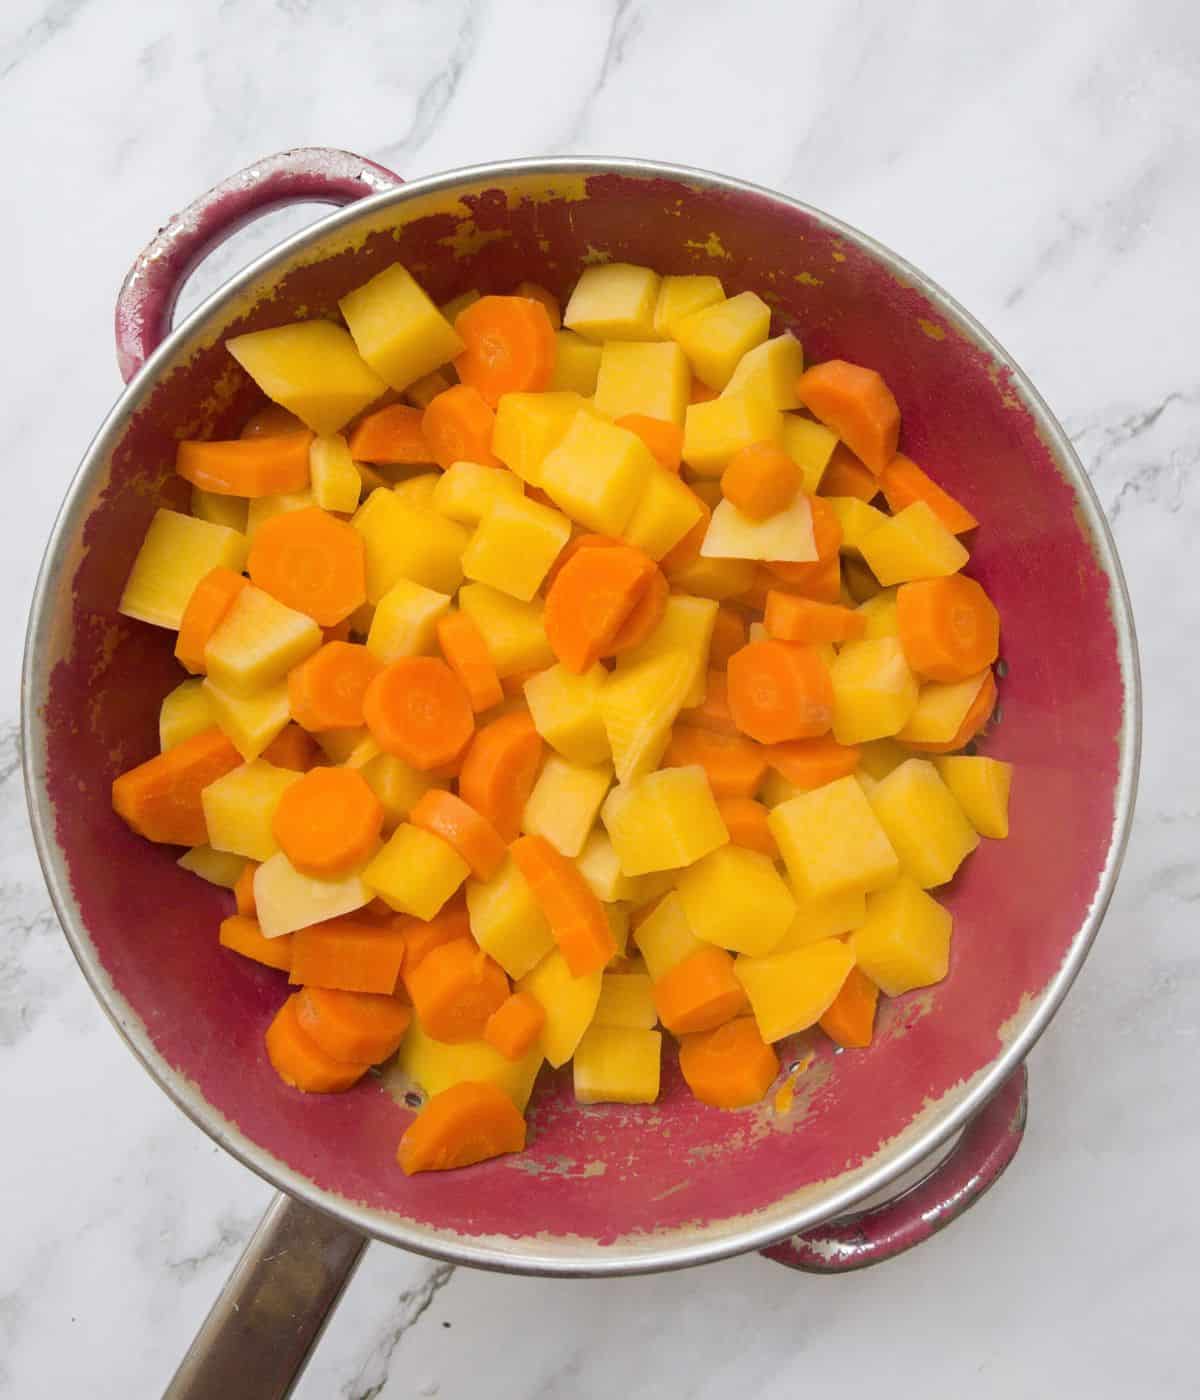 chopped carrot and swede in a colander.